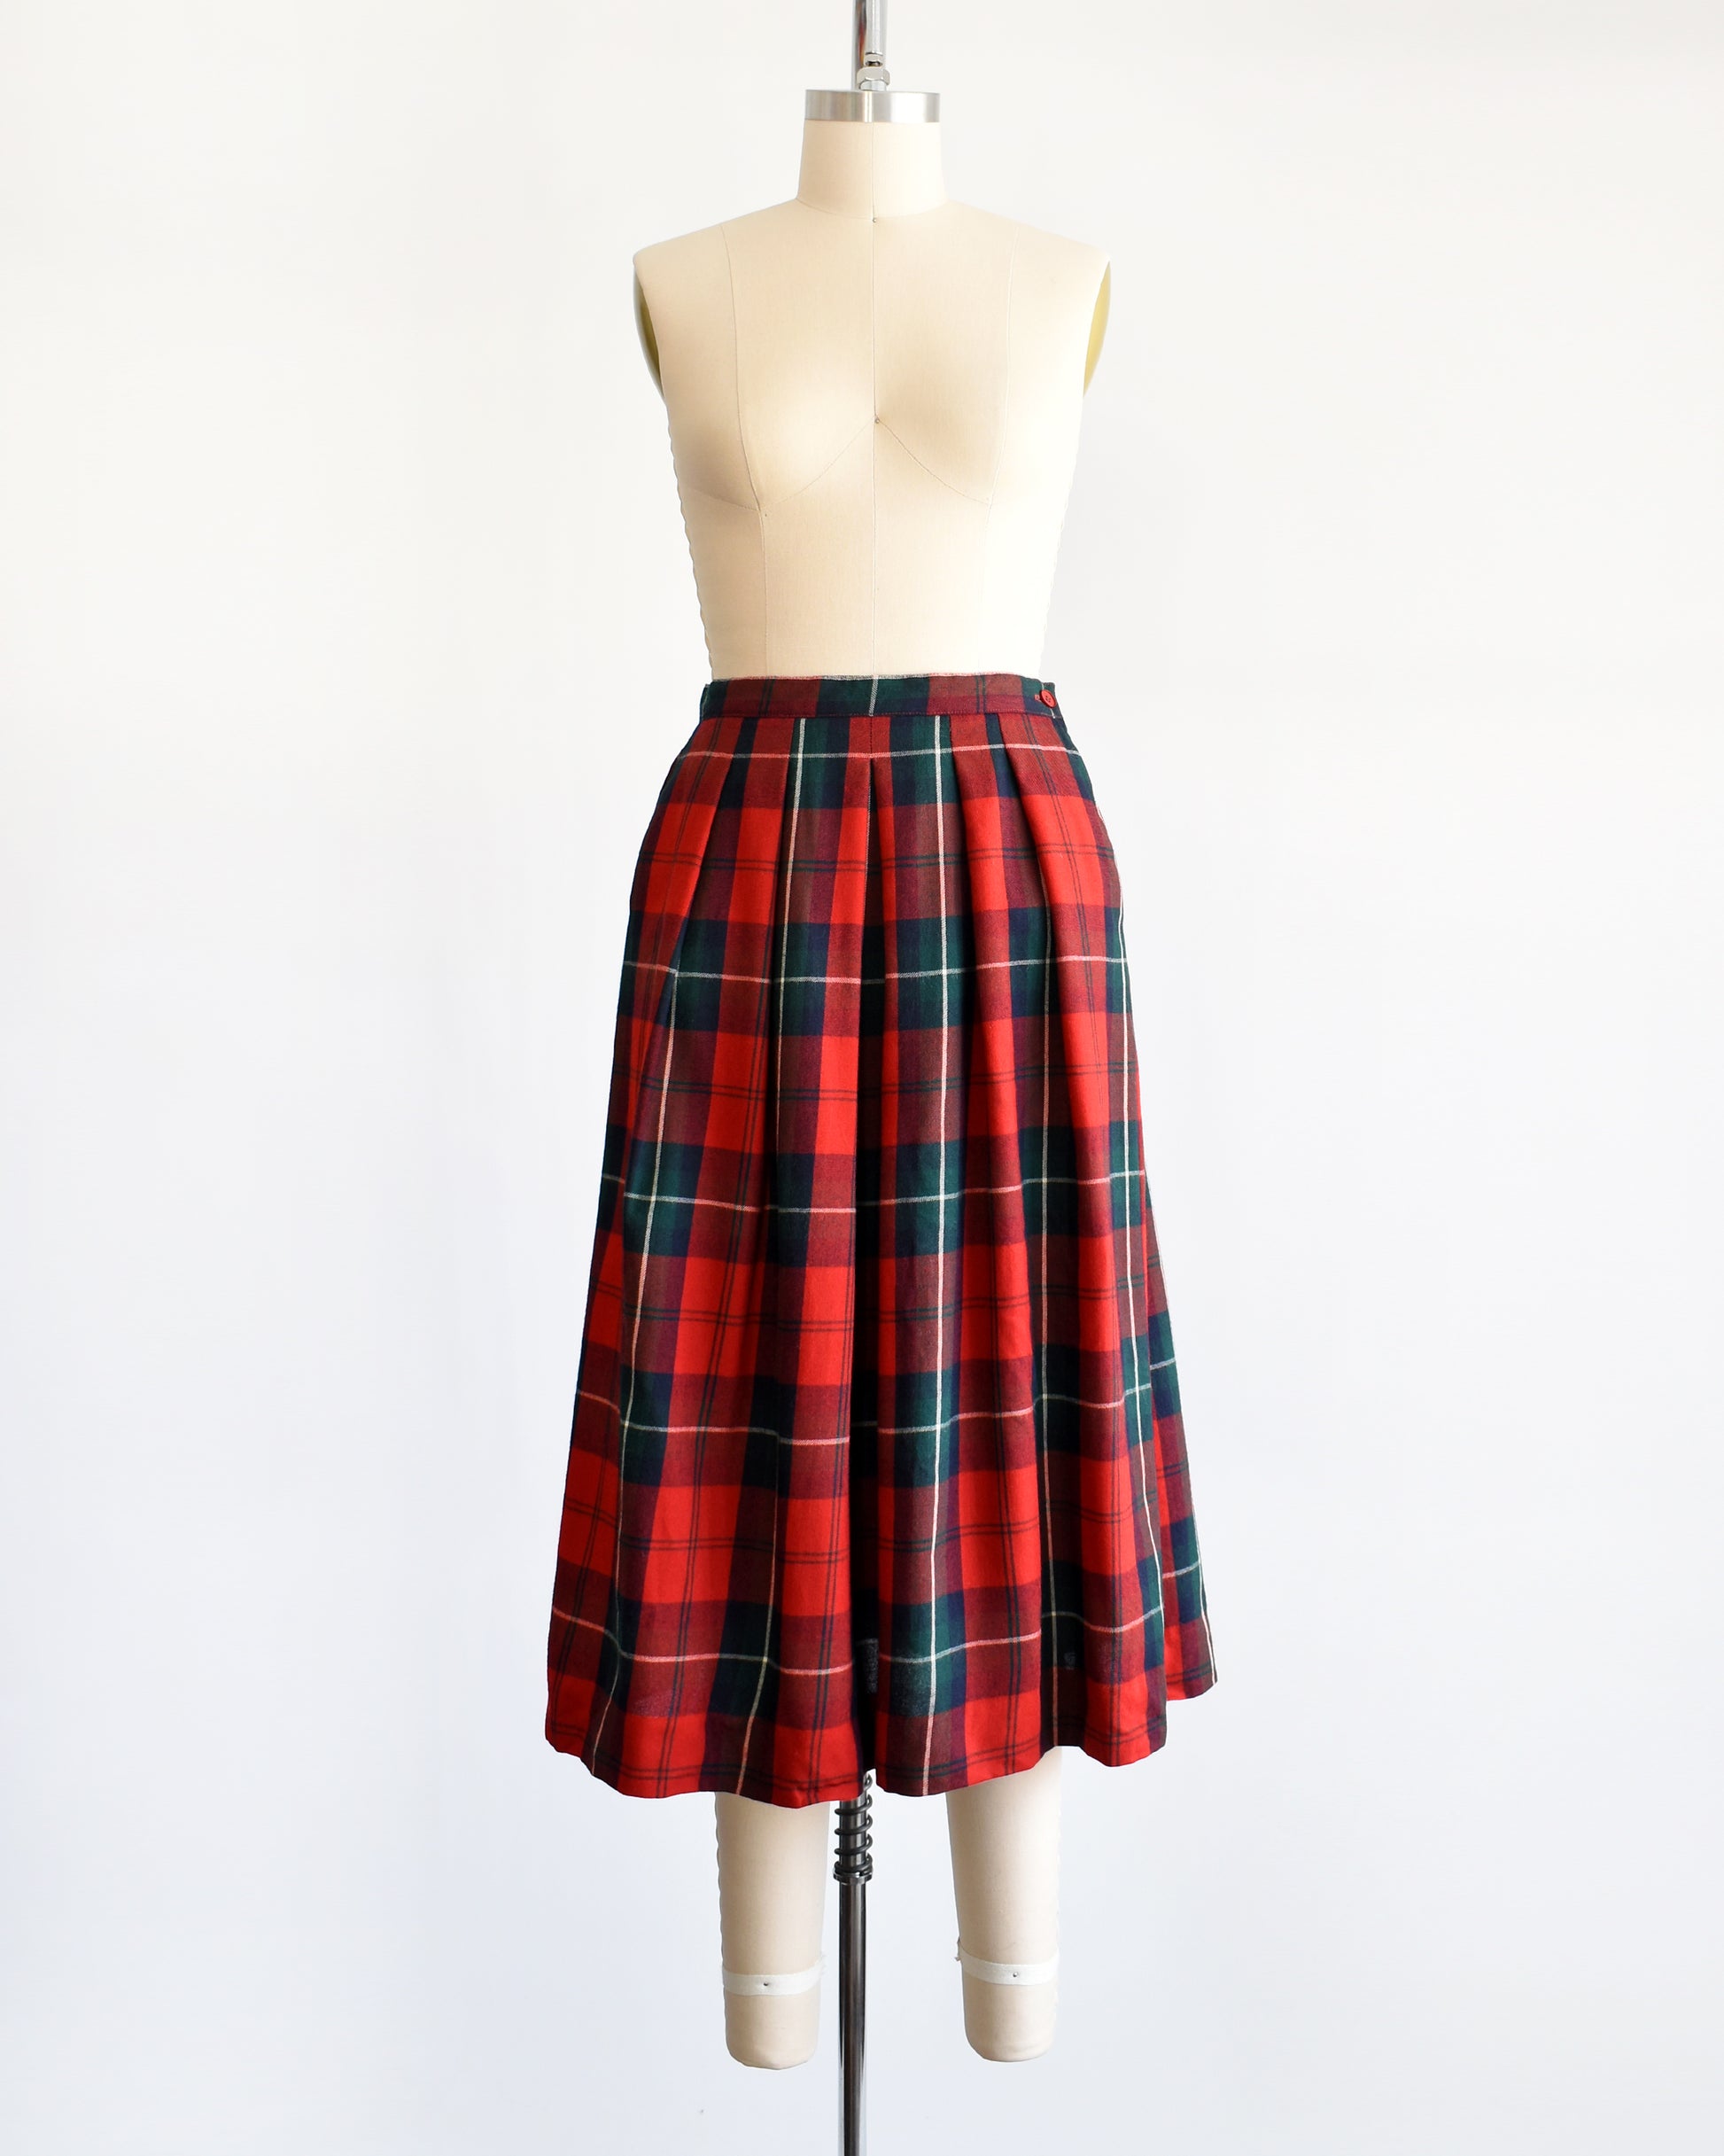 A vintage 80s red and green plaid pleated skirt on a dress form